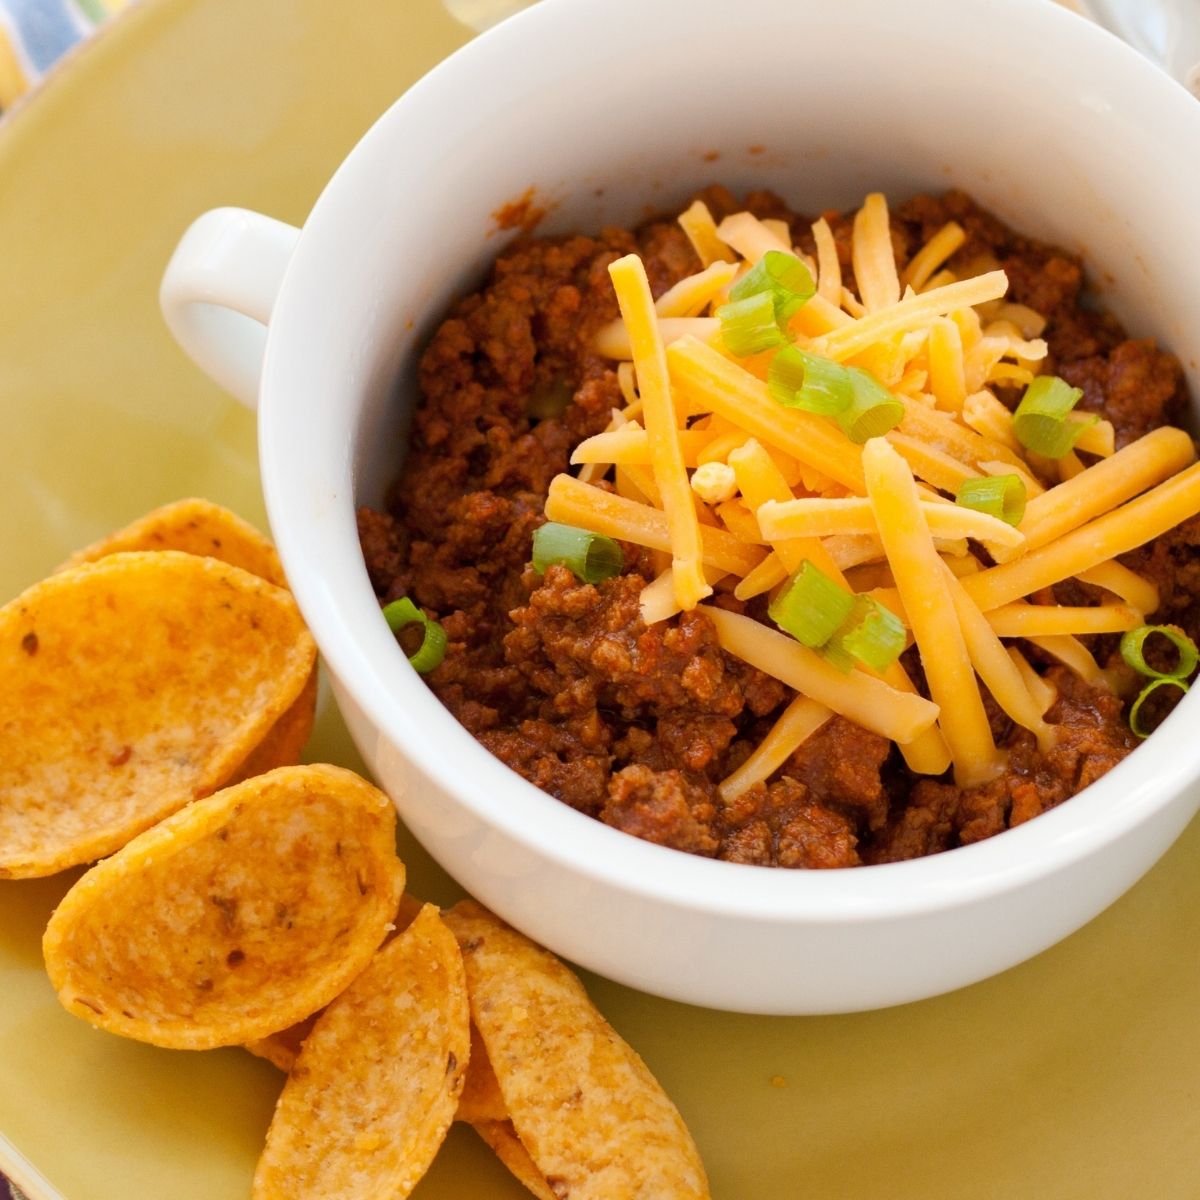 A bowl of very thick chili with shredded cheese and green onions on top and Frito chips on the side for dunking.